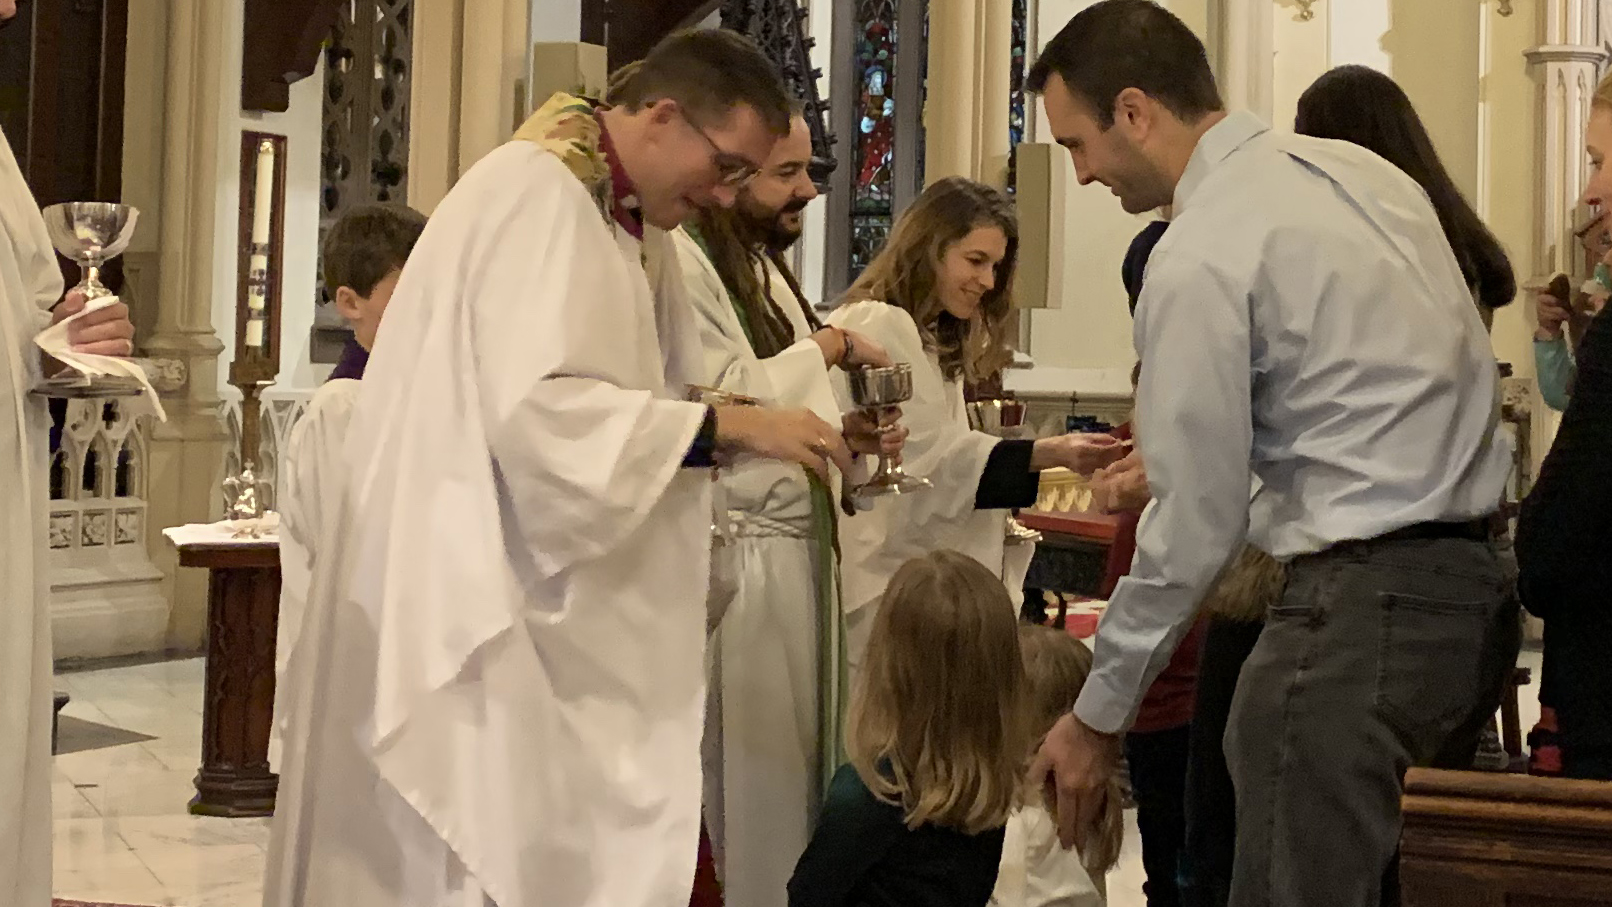 An image of children receiving communion at the cathedral